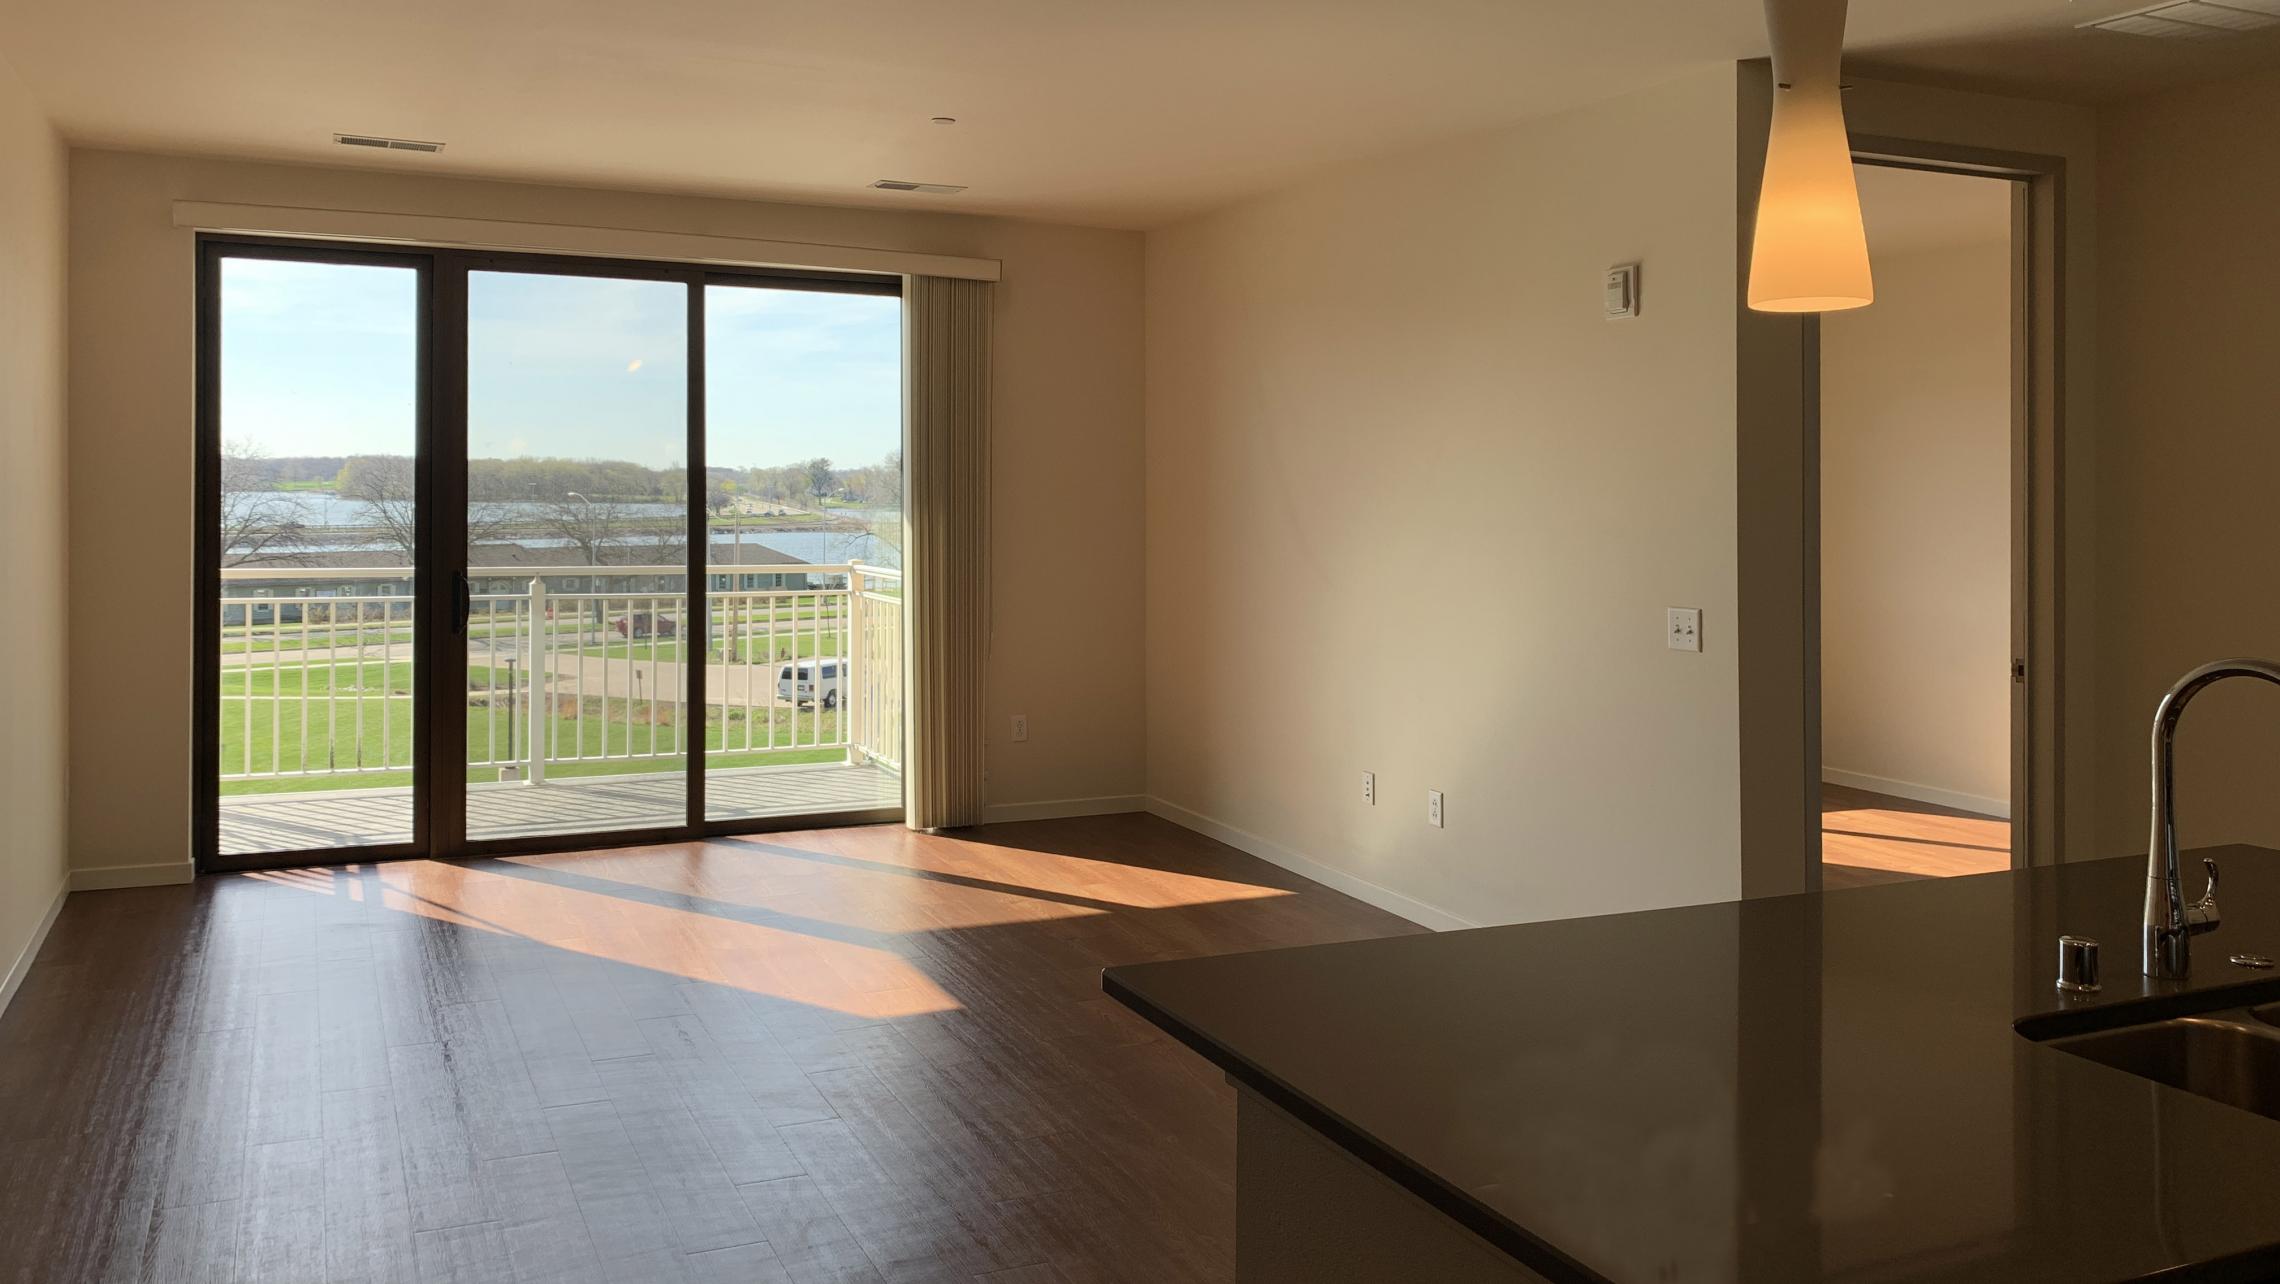 Nine-Line-at-The-Yards-Apartment-307-One-Bedroom-Corner-Lake-View-Natural-Light-Sunny-Modern-Upscale-Designe-Luxury-Luxurious-Balcony-Views-Fitness-Lounge-Courtyard-Dogs-Cats-Bike-Trail-Downtown-Capitol